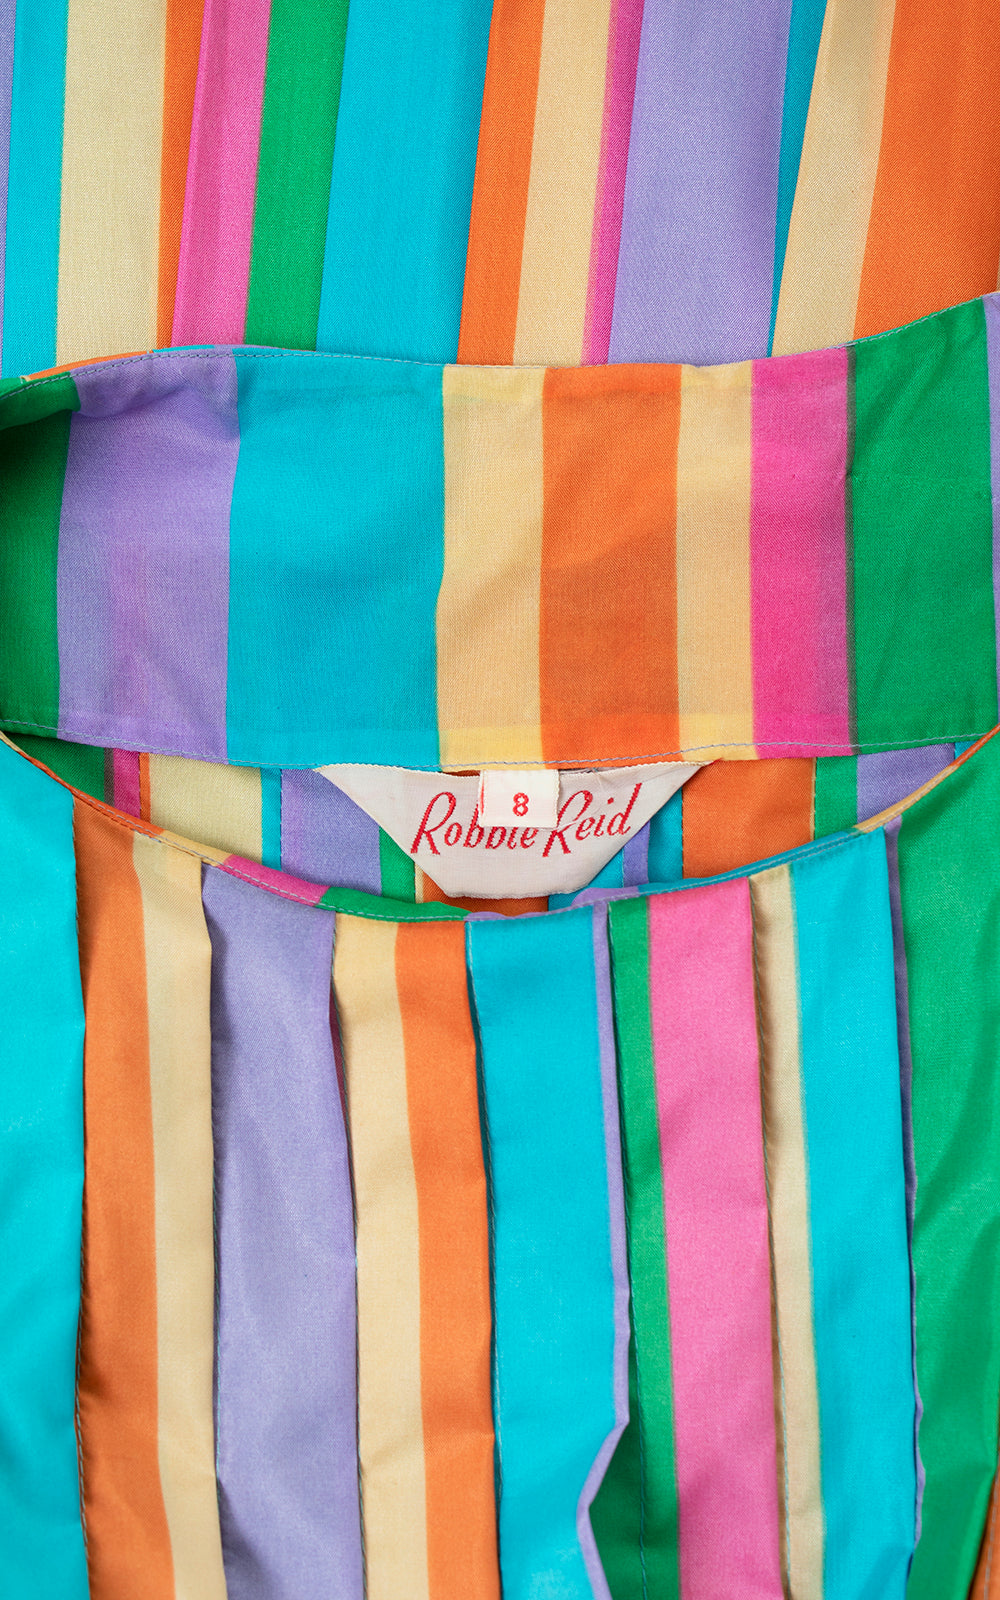 Vintage 1960s Rainbow Striped Pleated Fit and Flare Dress by Birthday Life Vintage